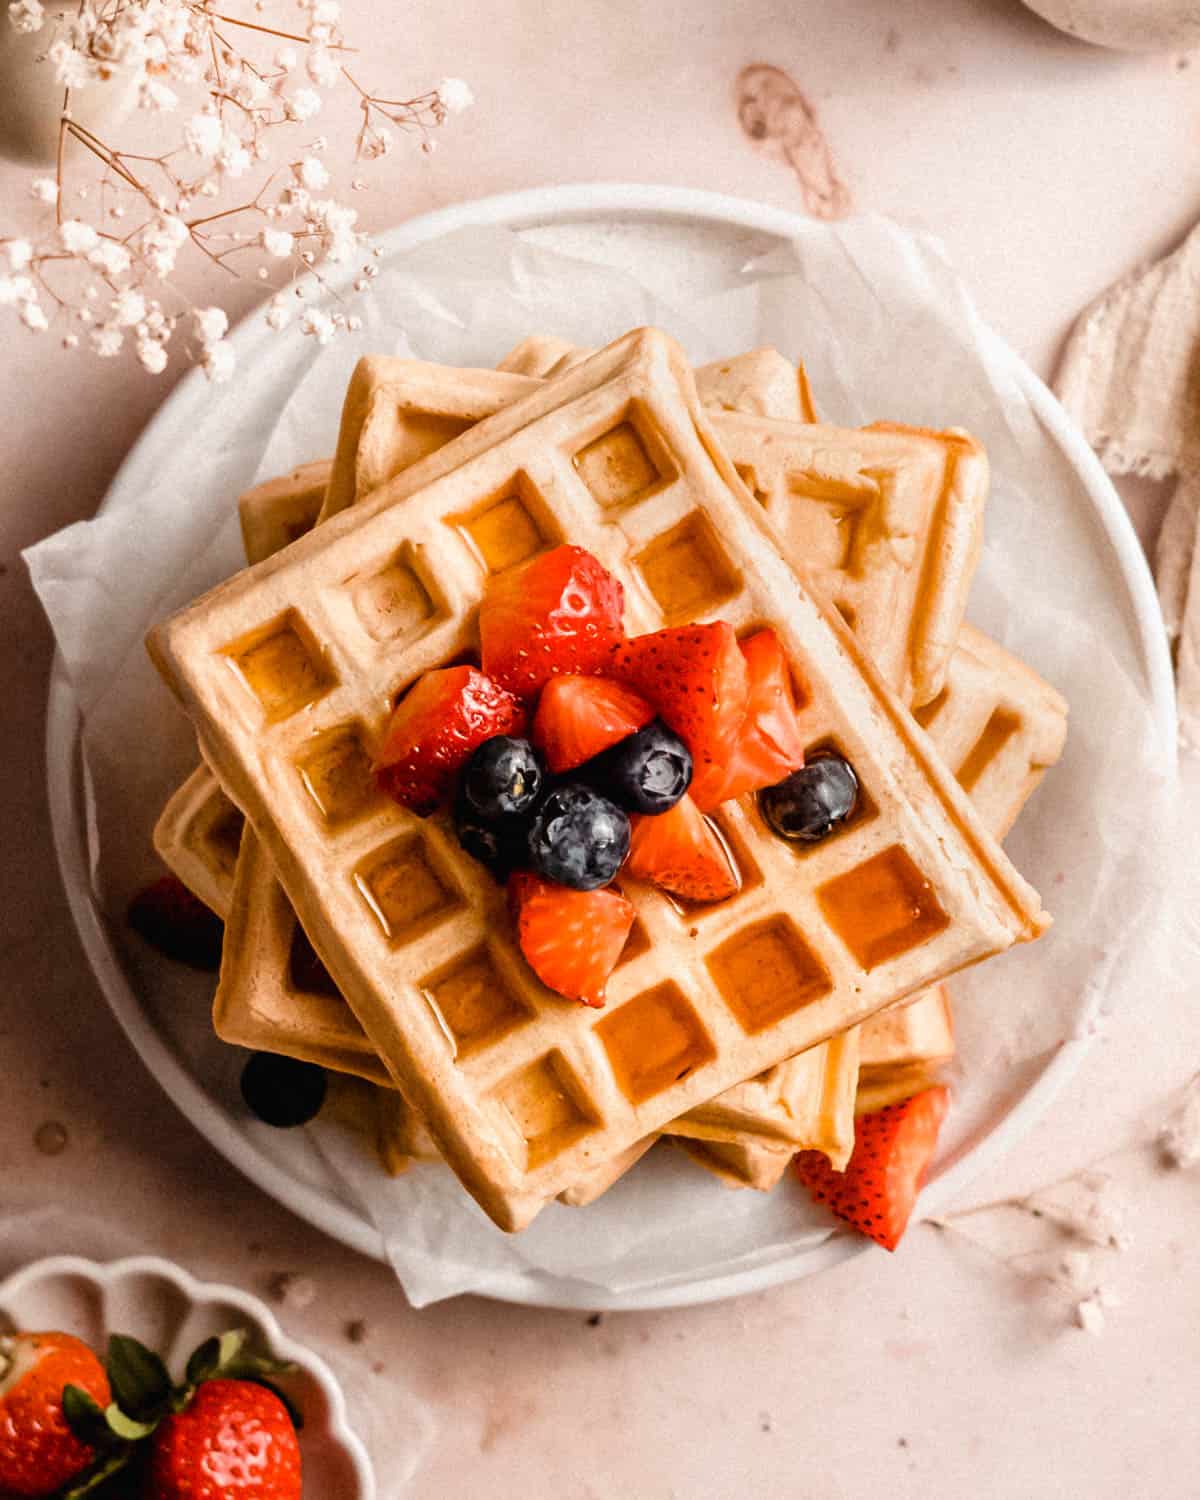 stack of waffles on plates topped with fresh fruits and maple syrup.